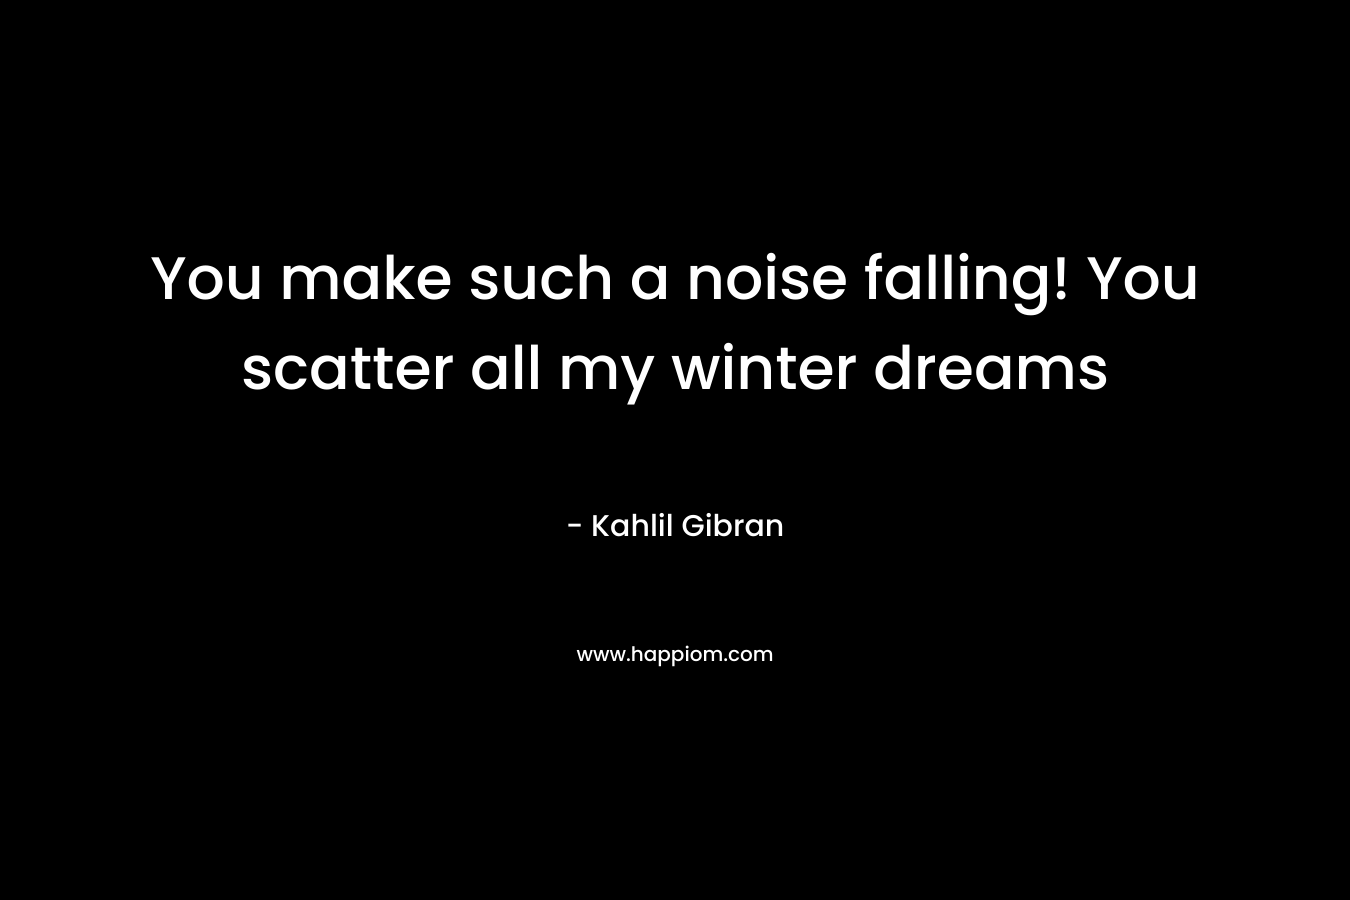 You make such a noise falling! You scatter all my winter dreams – Kahlil Gibran